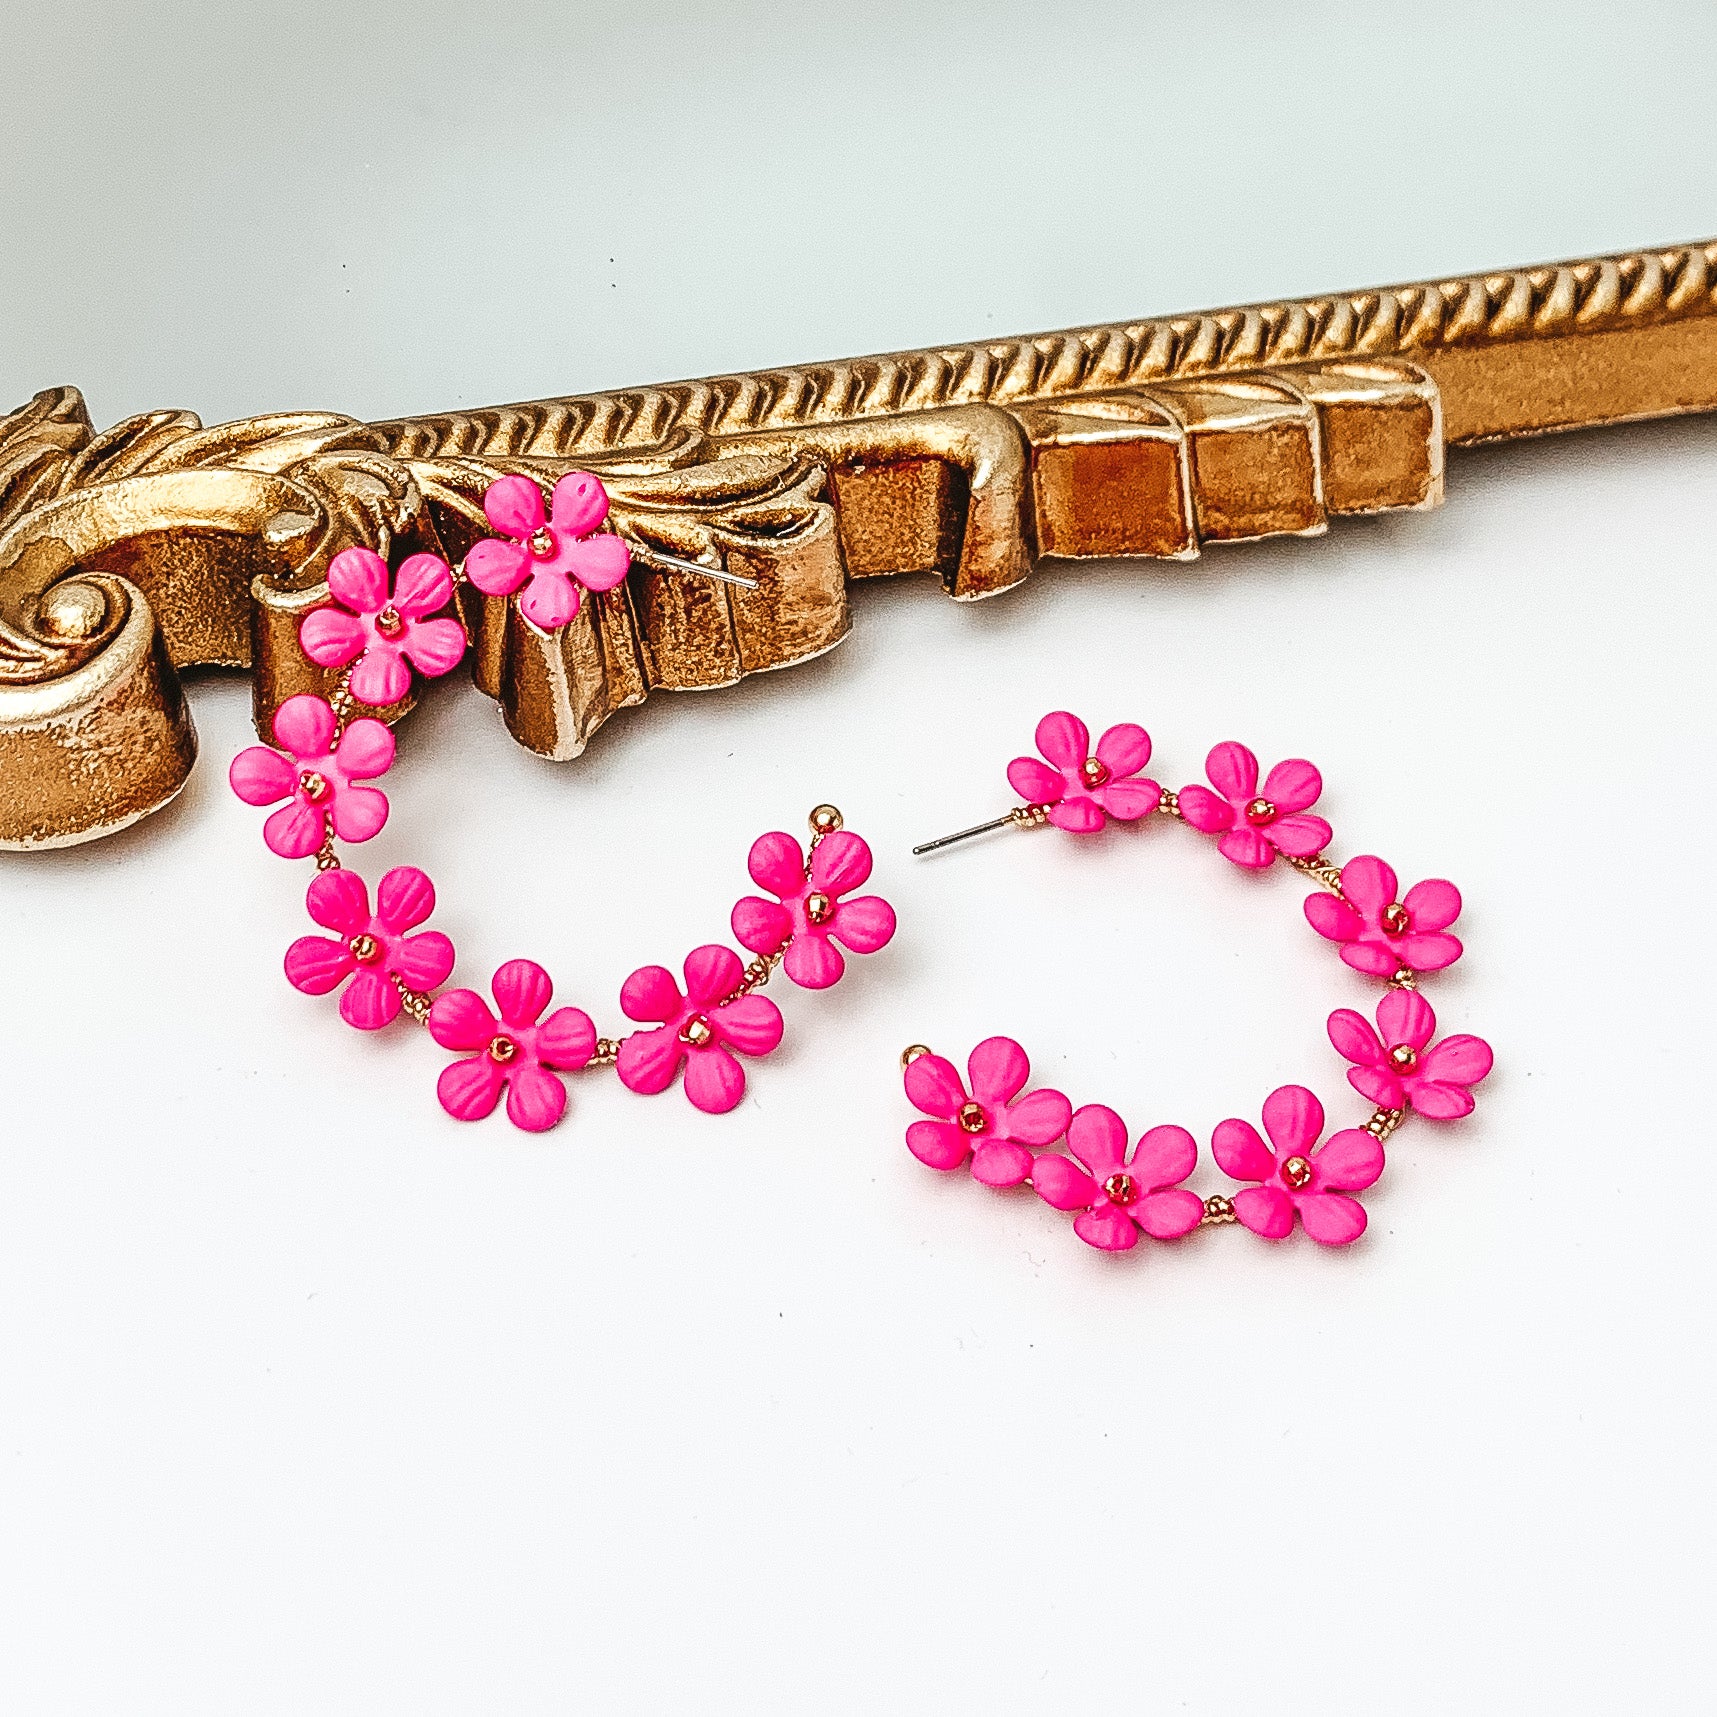 Gold hoop earrings with hot pink flower charms outlining the earrings. These flowers have a gold bead center. One hoop is pictured laying against a gold mirror while the other hoop is laying flat on the white background. 